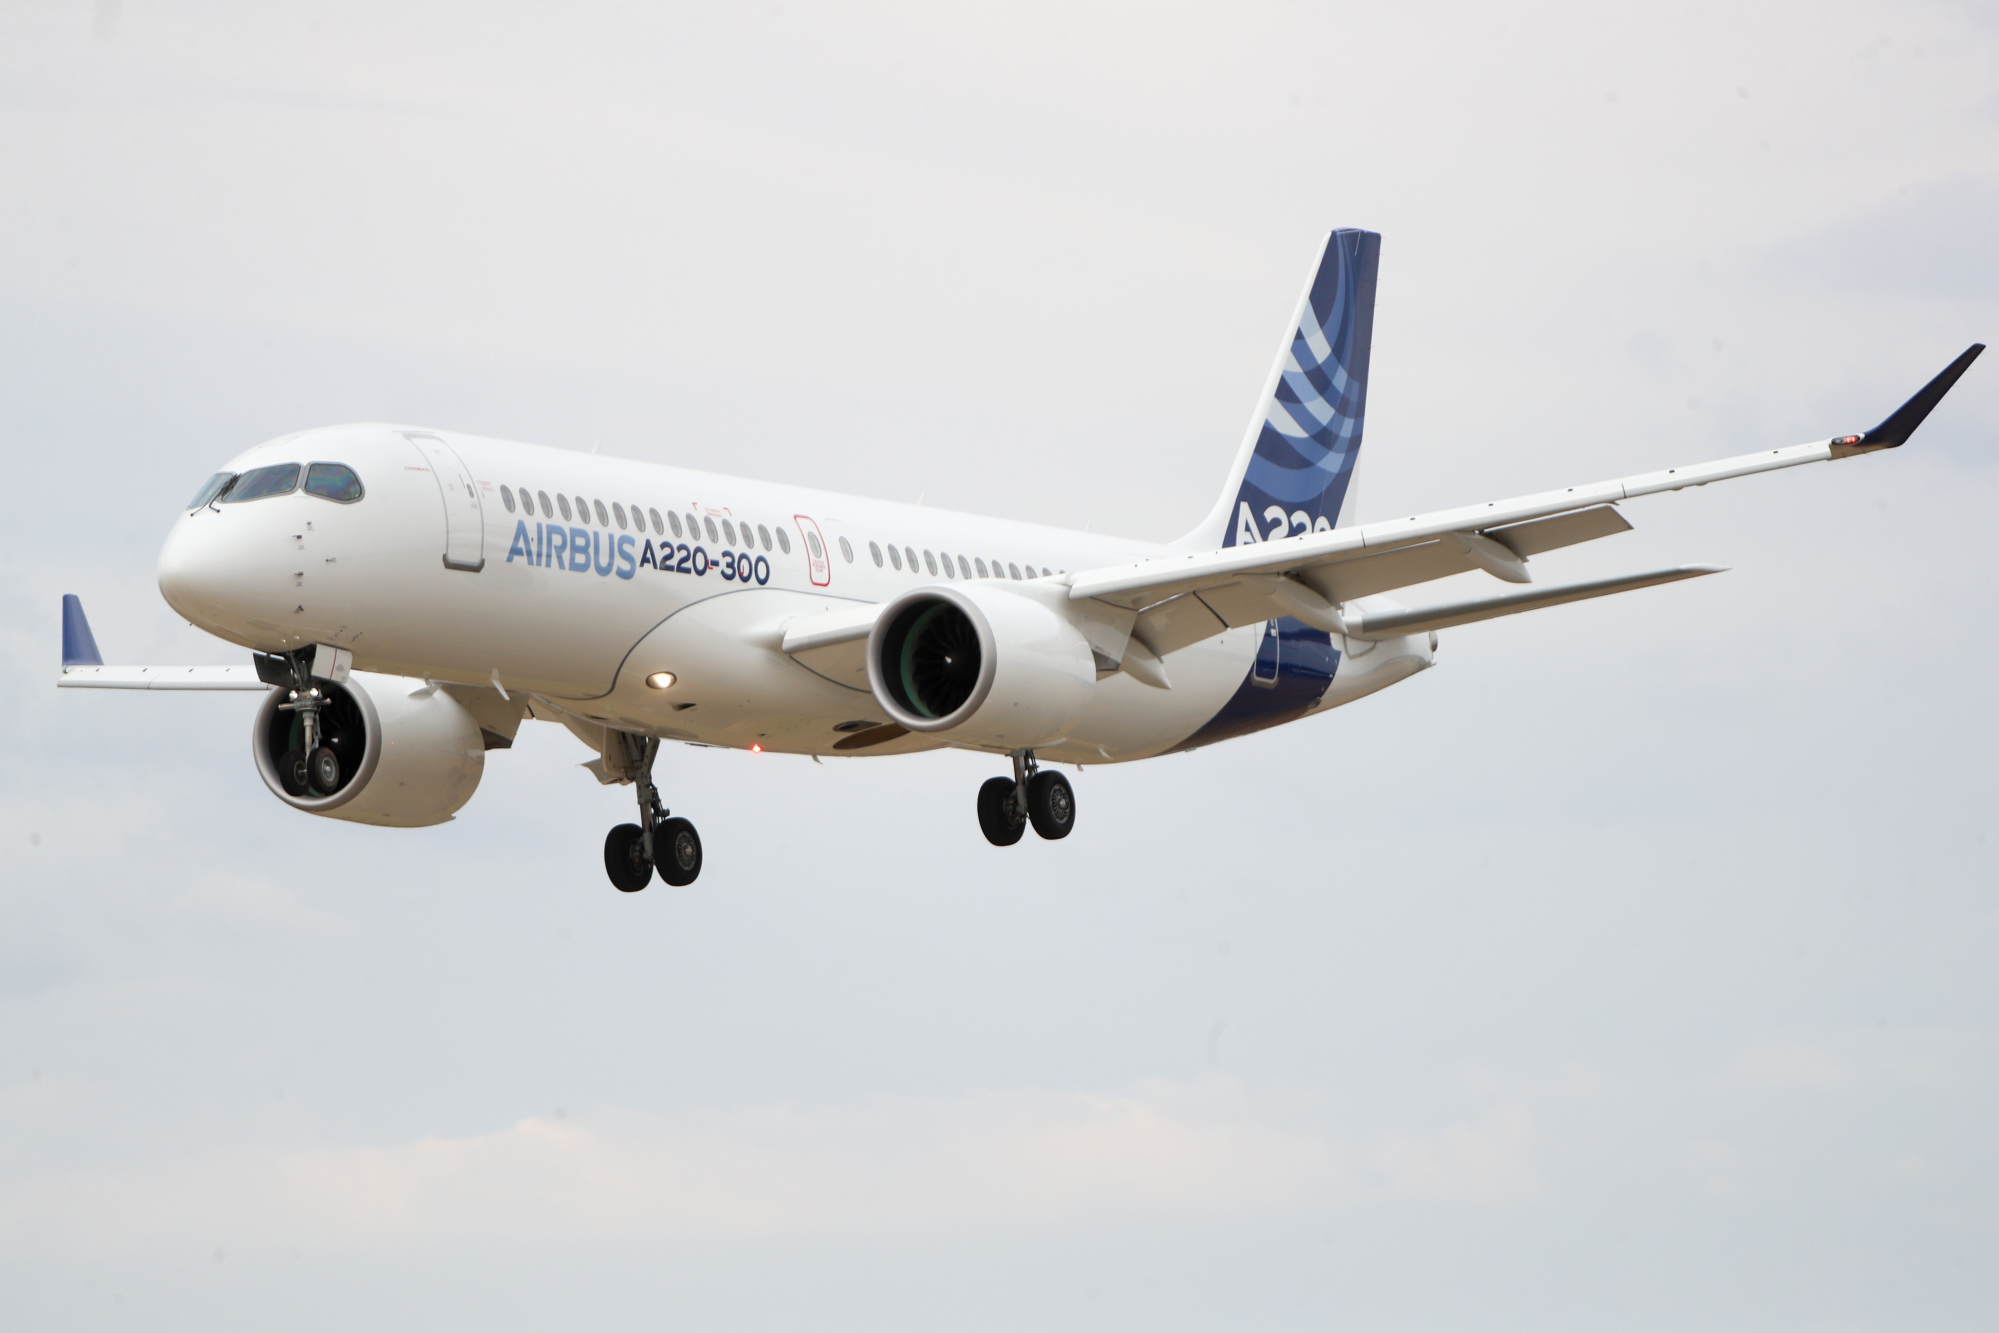 An Airbus SE A220-300 plane performs during the flying display on the opening day of the Farnborough International Airshow.